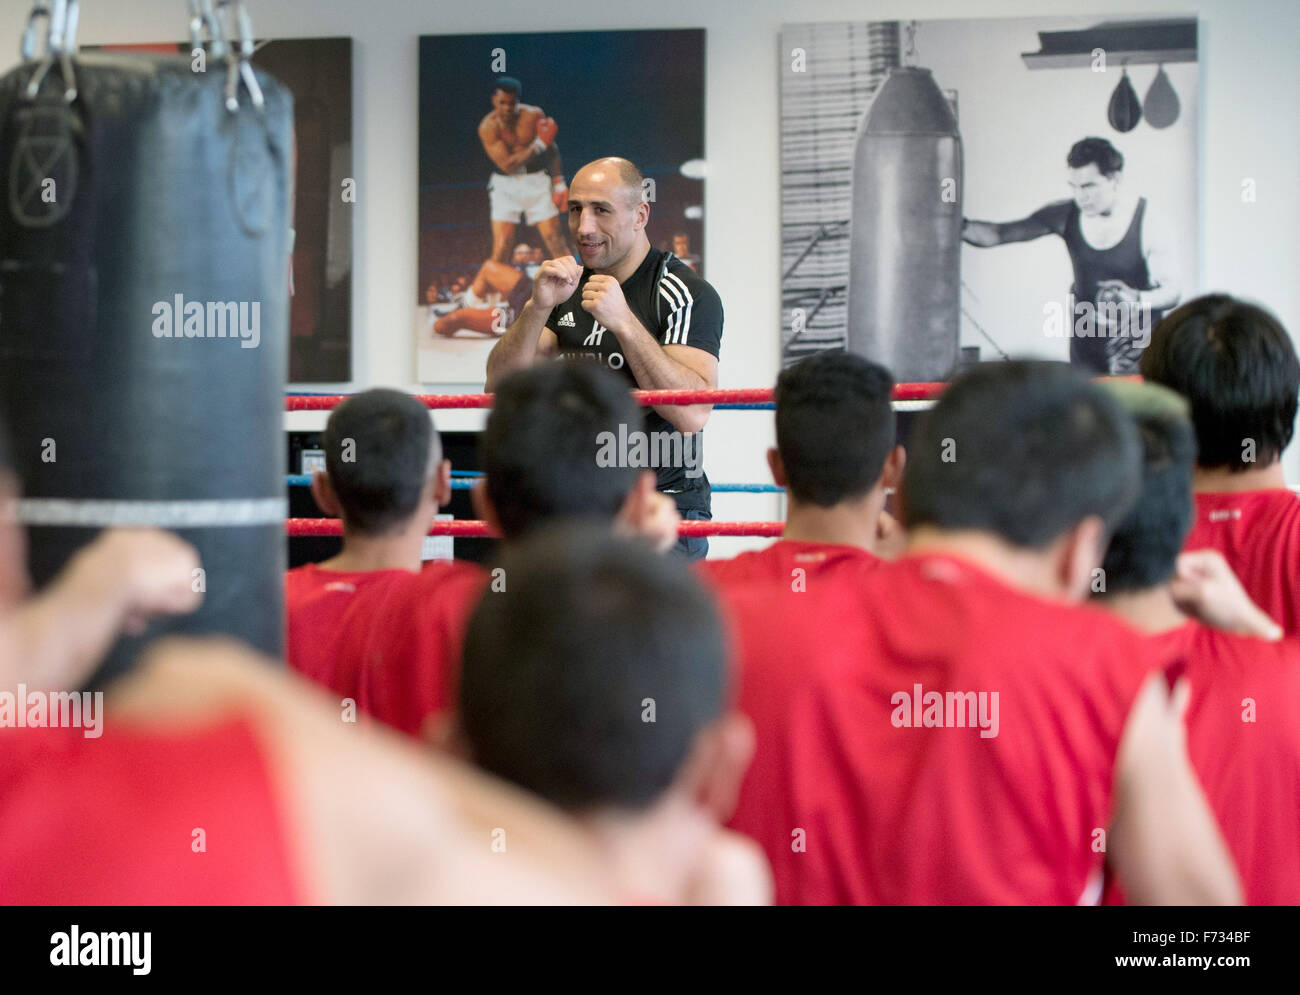 Boxing world champion Arthur Abraham works with underaged refugees during a training session at the Max Schmeling Gymnasium in Berlin, Germany, 24 November 2015. The event featuring unaccompanied refugees was organised by Team Sauerland, sporting goods manufacturer Adidas, the German Confederation of   Skilled Crafts and German political party CDU. Photo: SOEREN STACHE/dpa Stock Photo